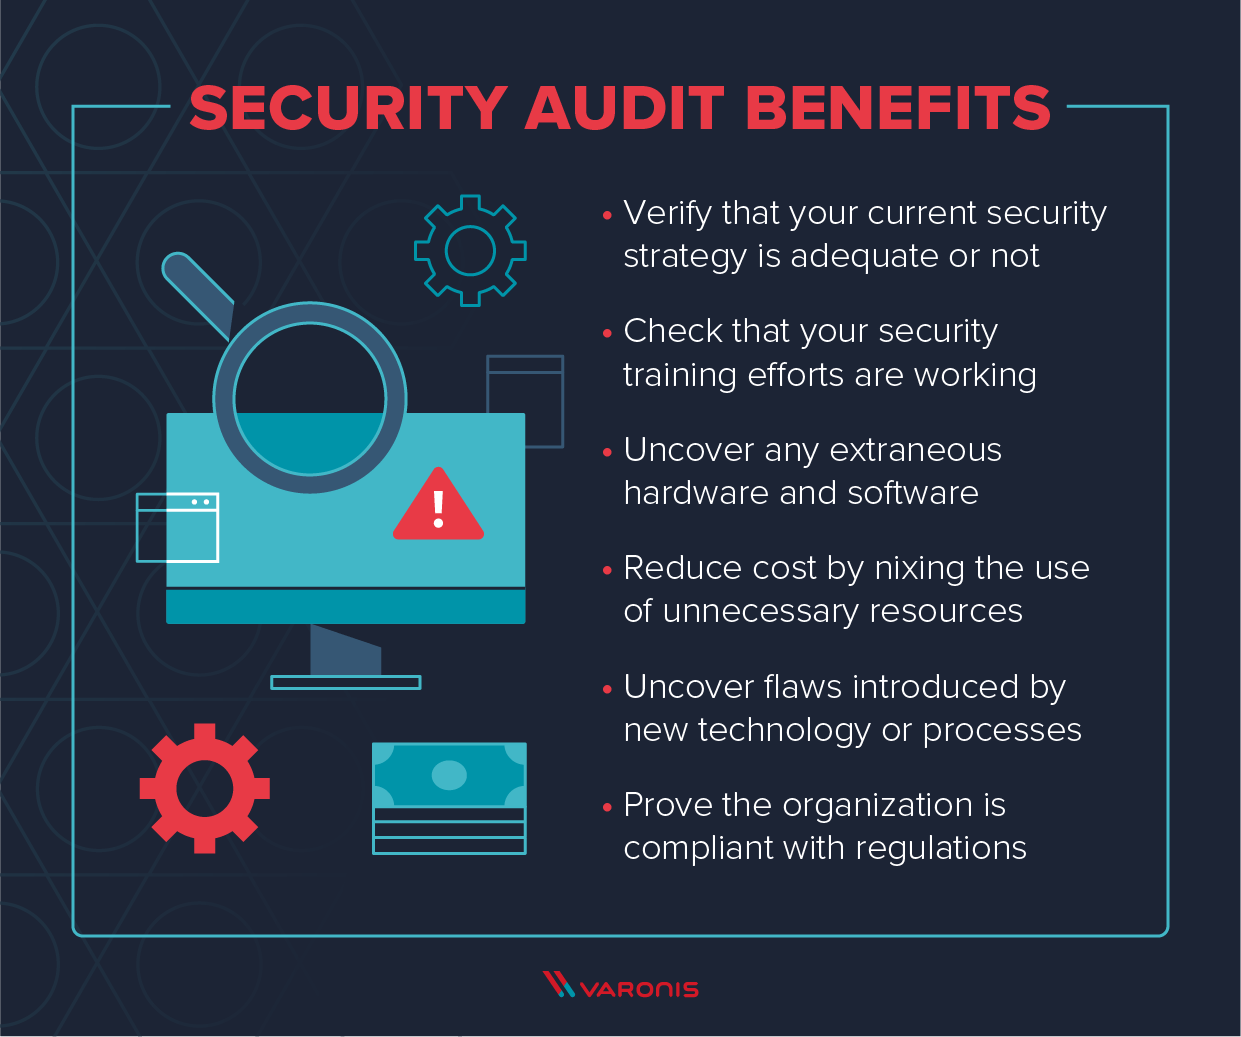 bulleted list of security audit benefits